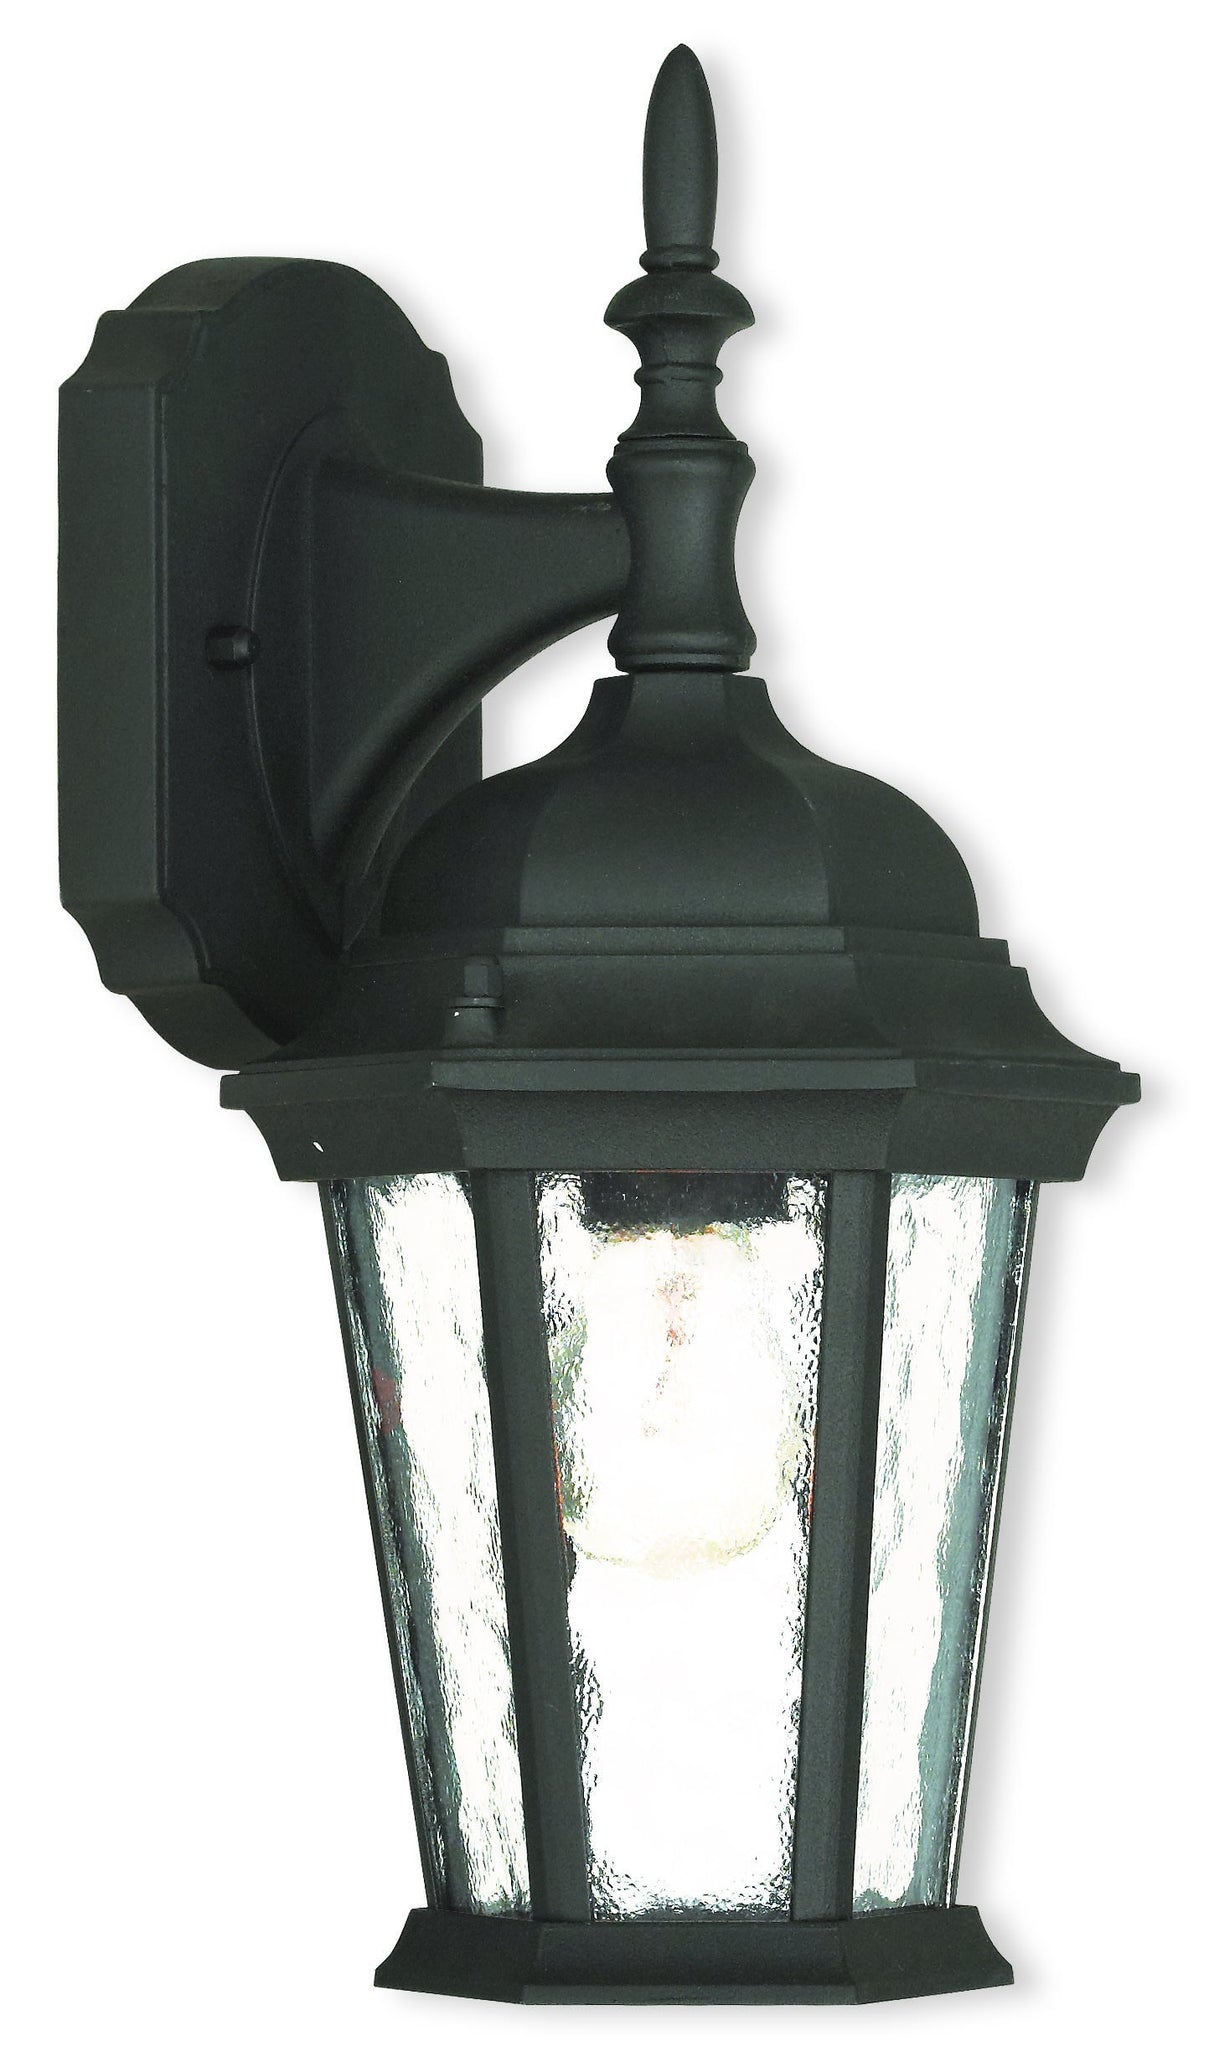 Livex Lighting 75460-14 Traditional One Light Outdoor Wall Lantern from Hamilton Collection Finish, Textured Black